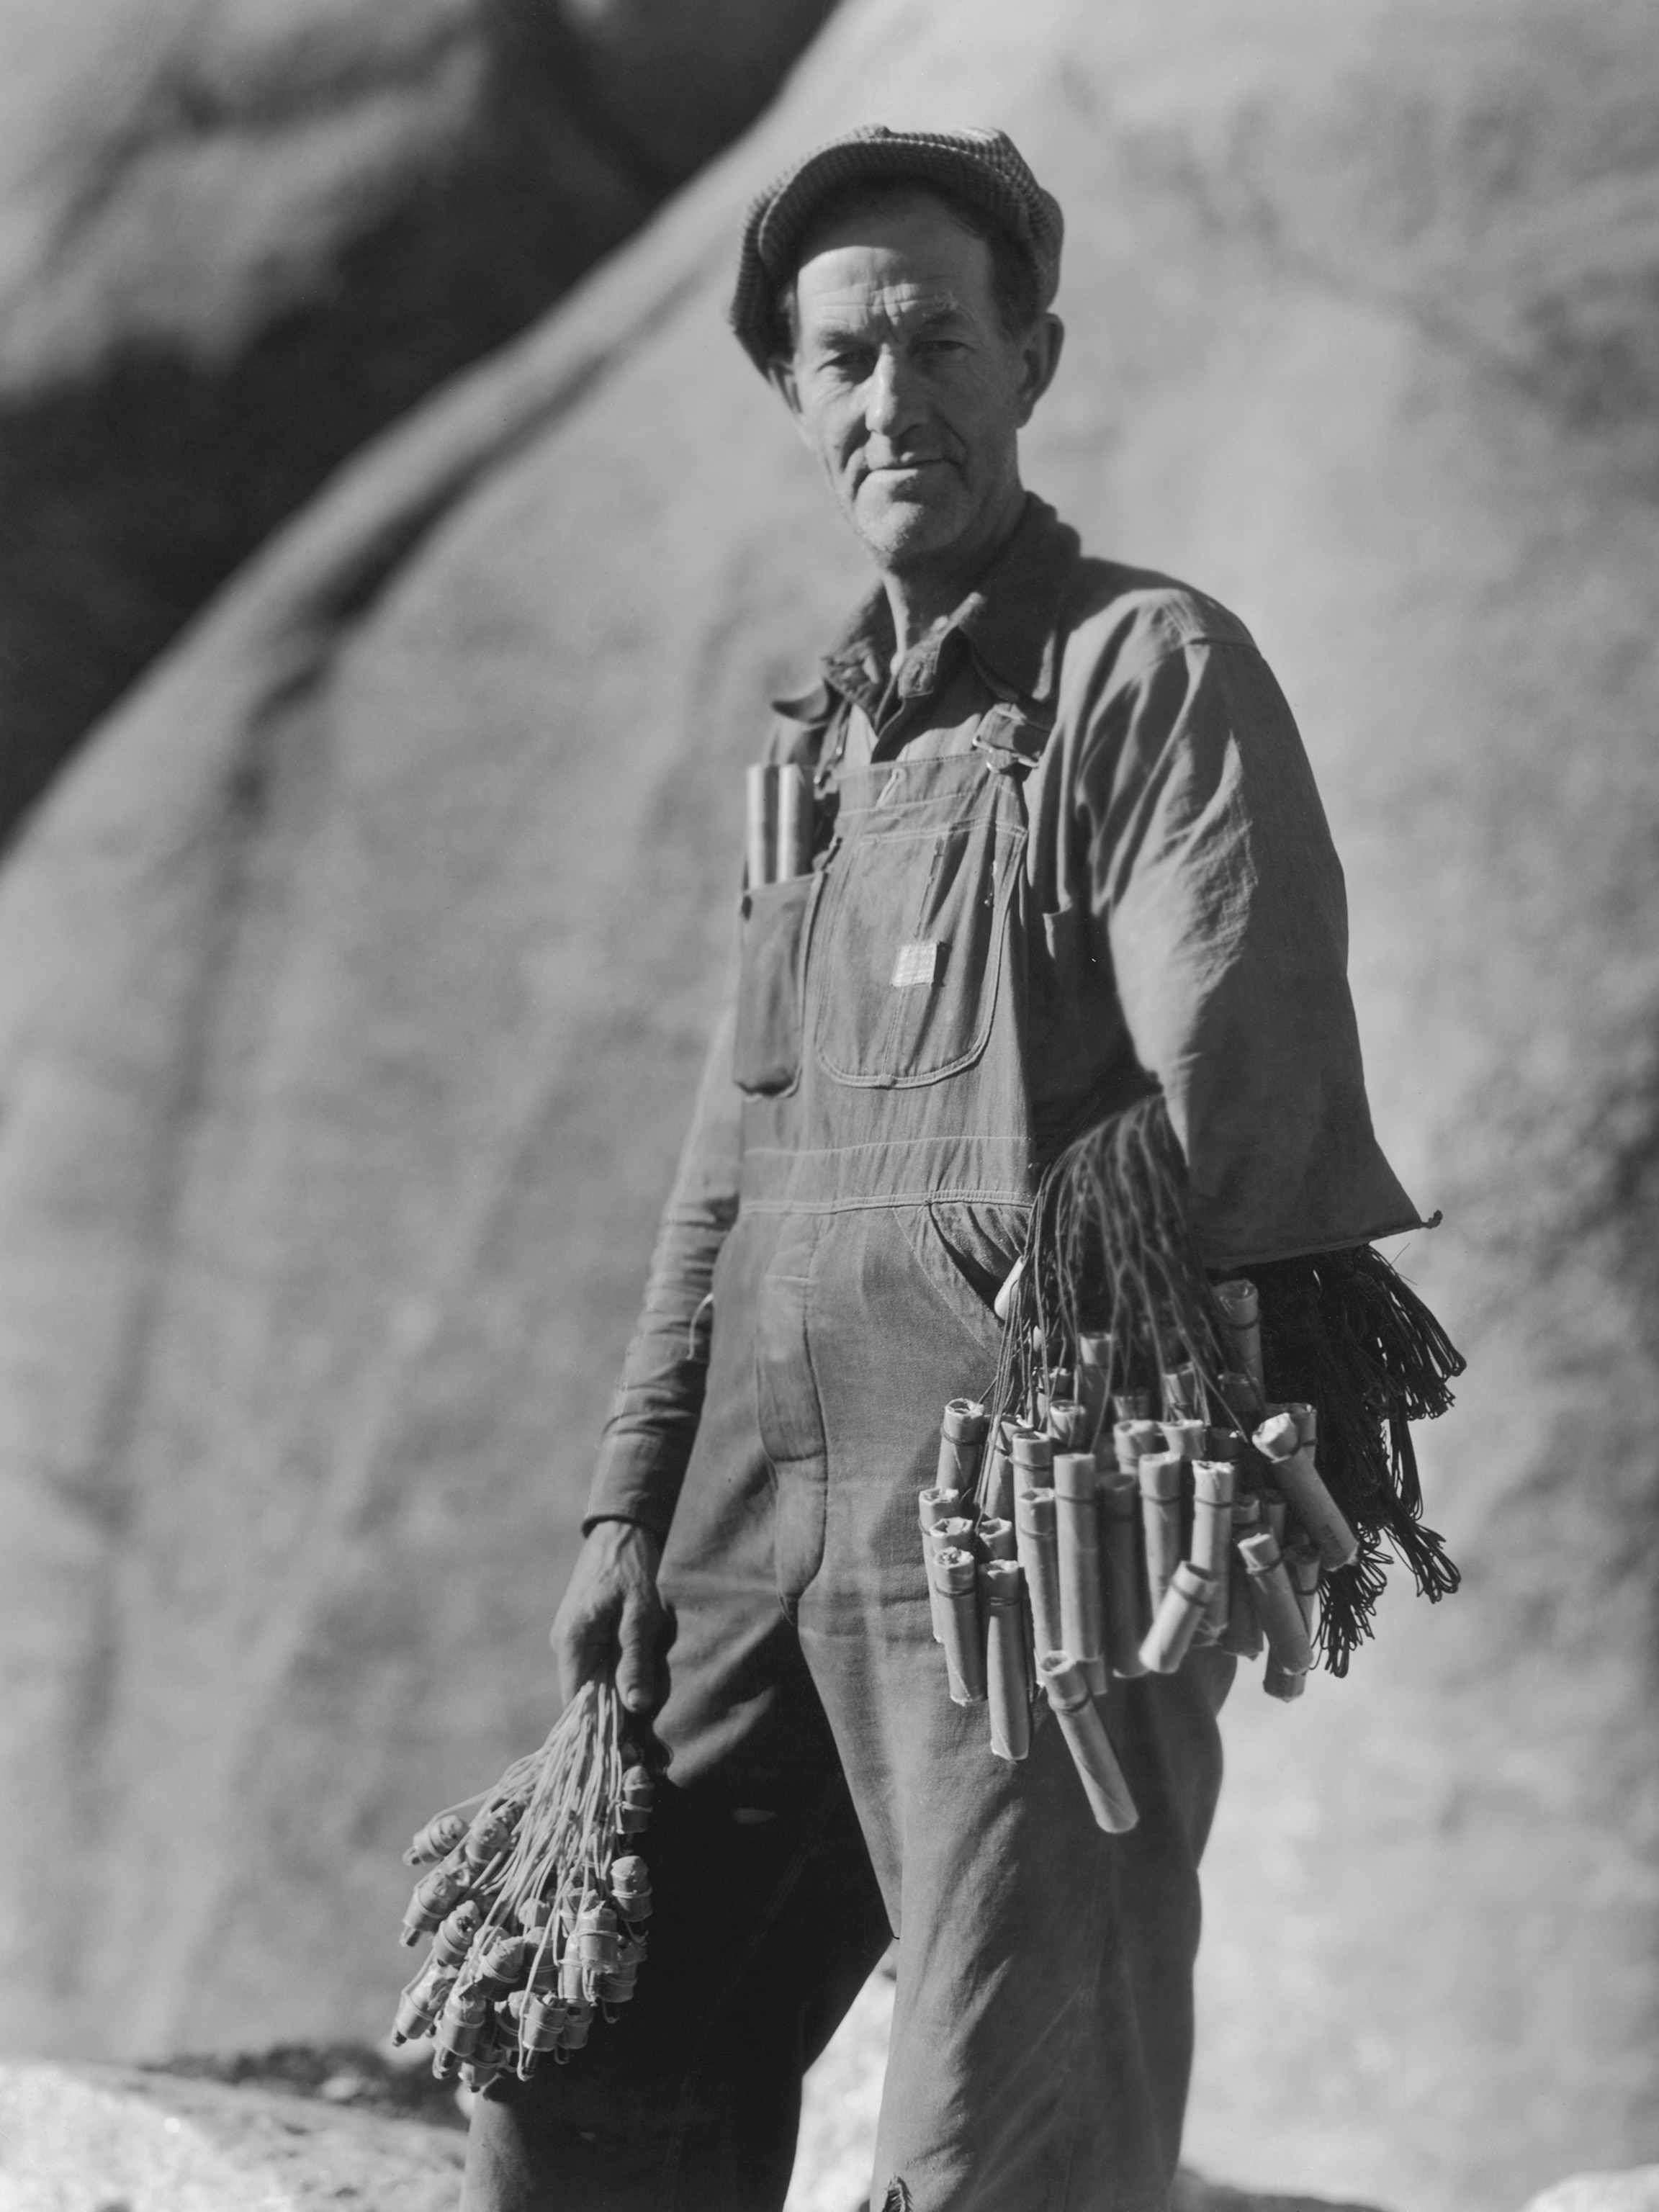 a person working on Mount Rushmore holding dynamite and detonators